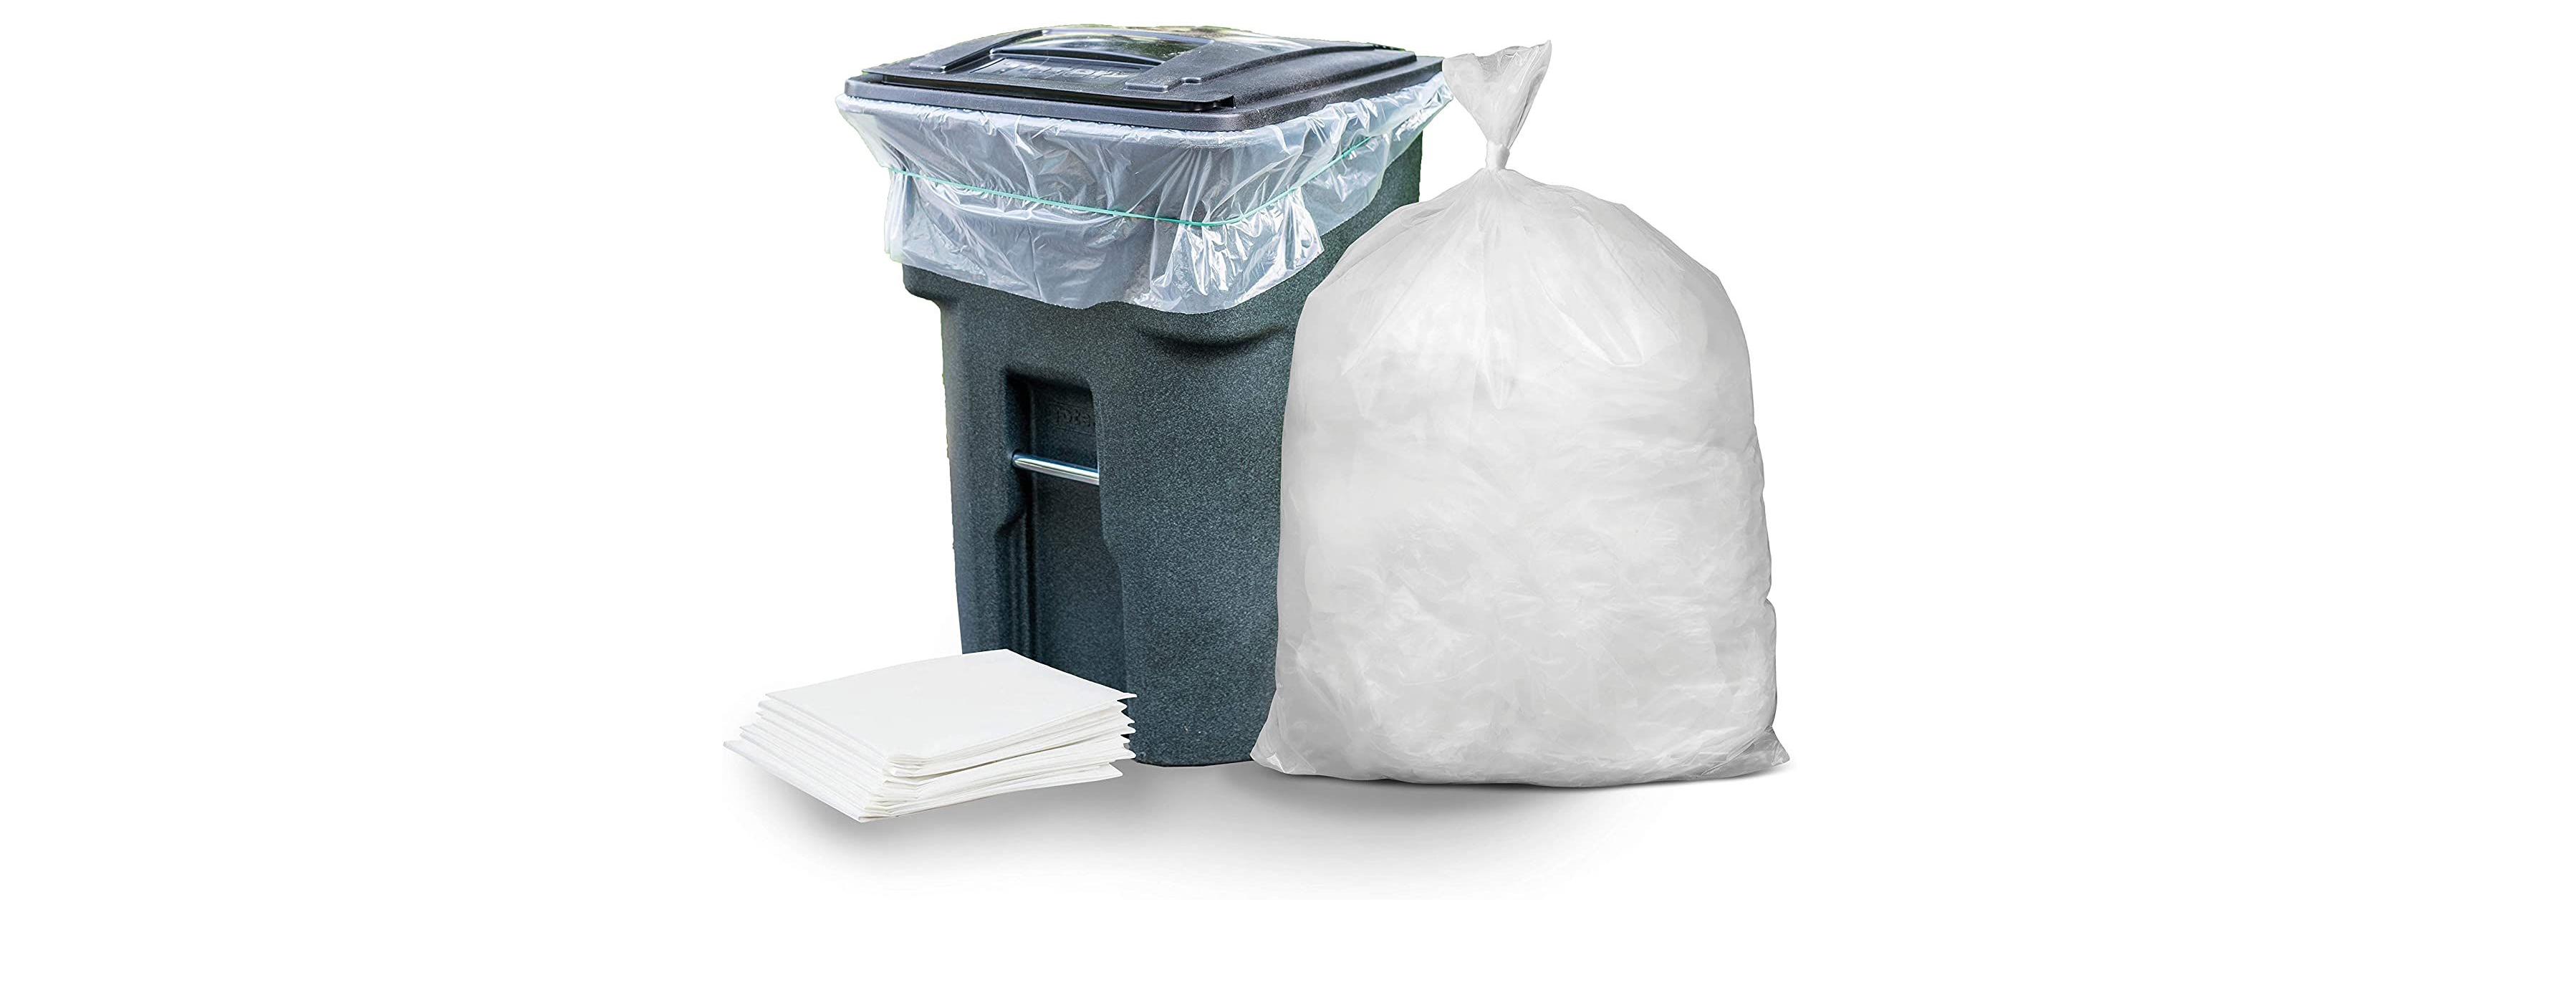 Clear garbage bags